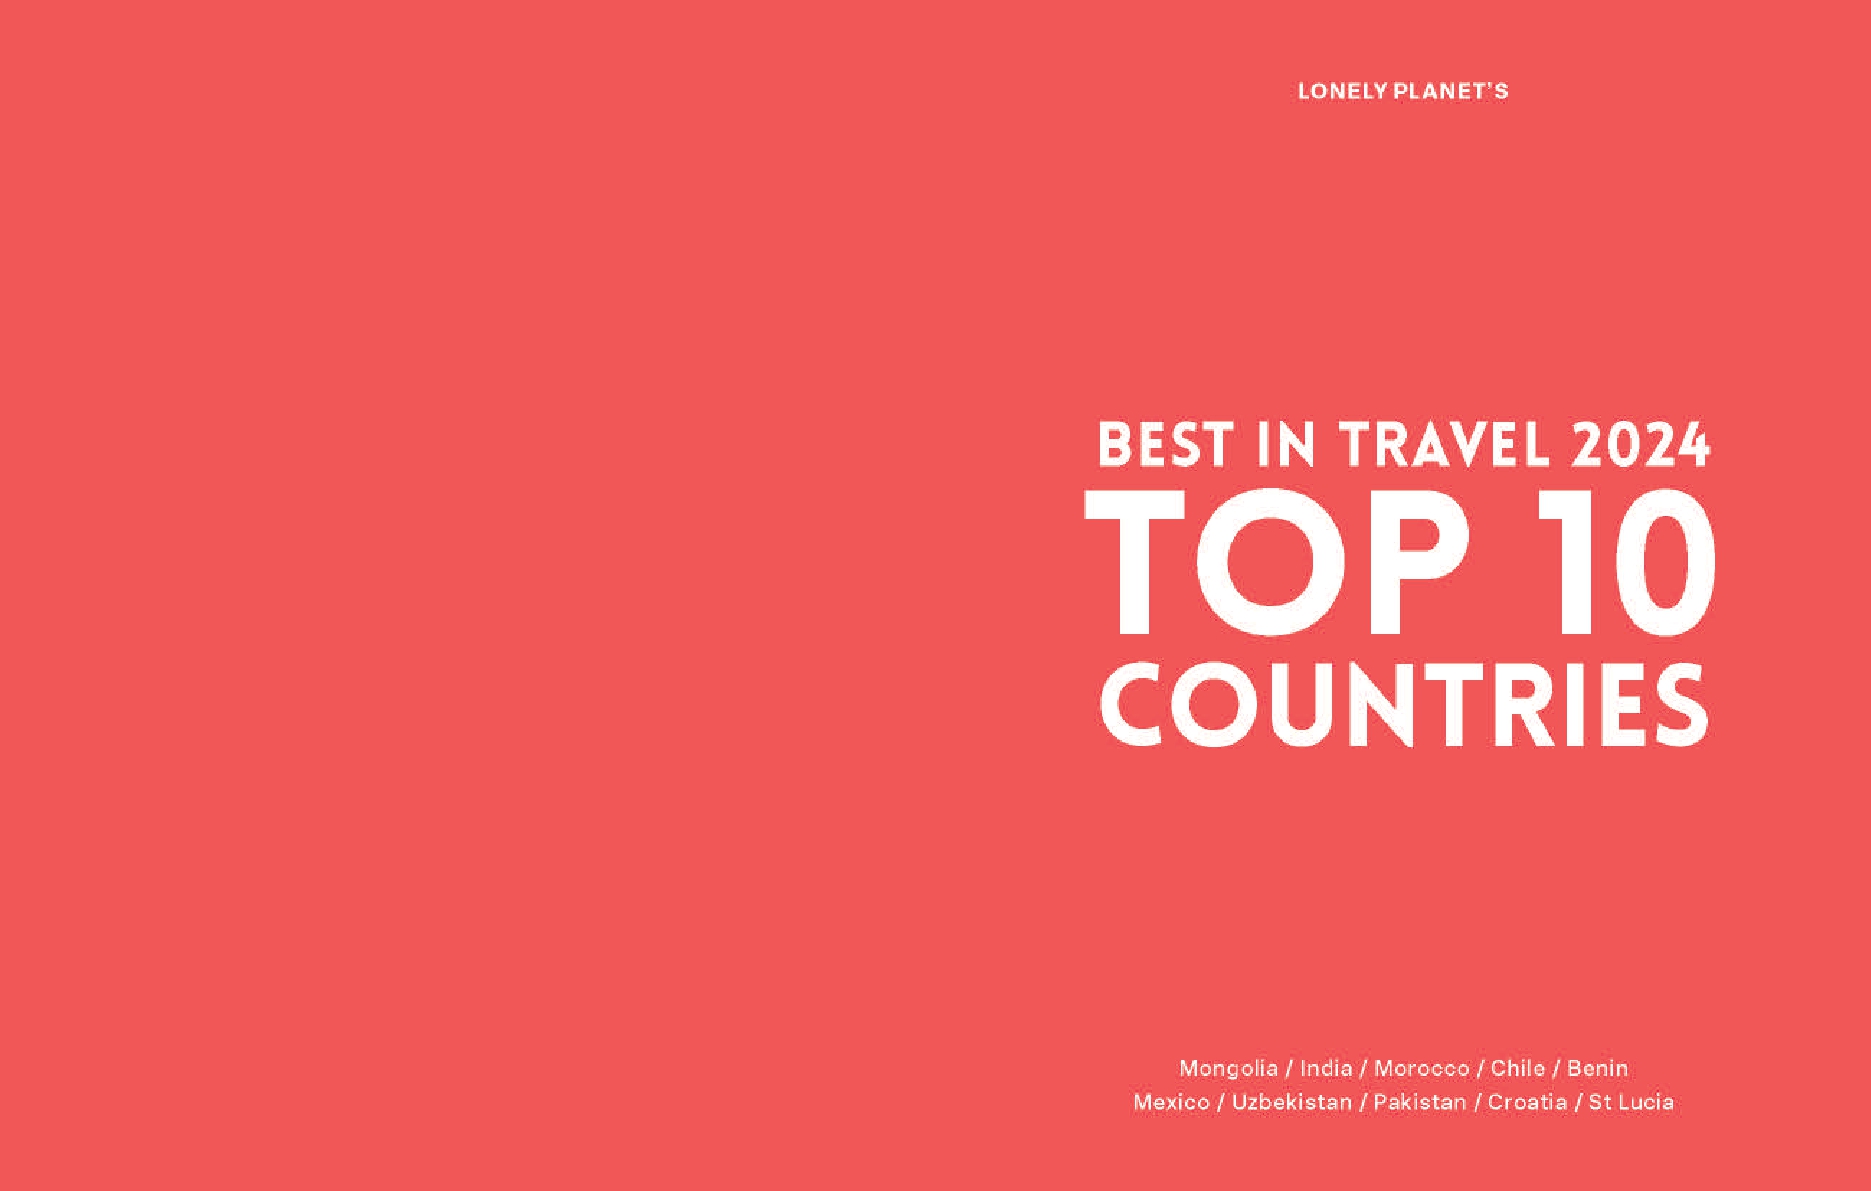 Lonely Planet's Best in Travel 2024 1